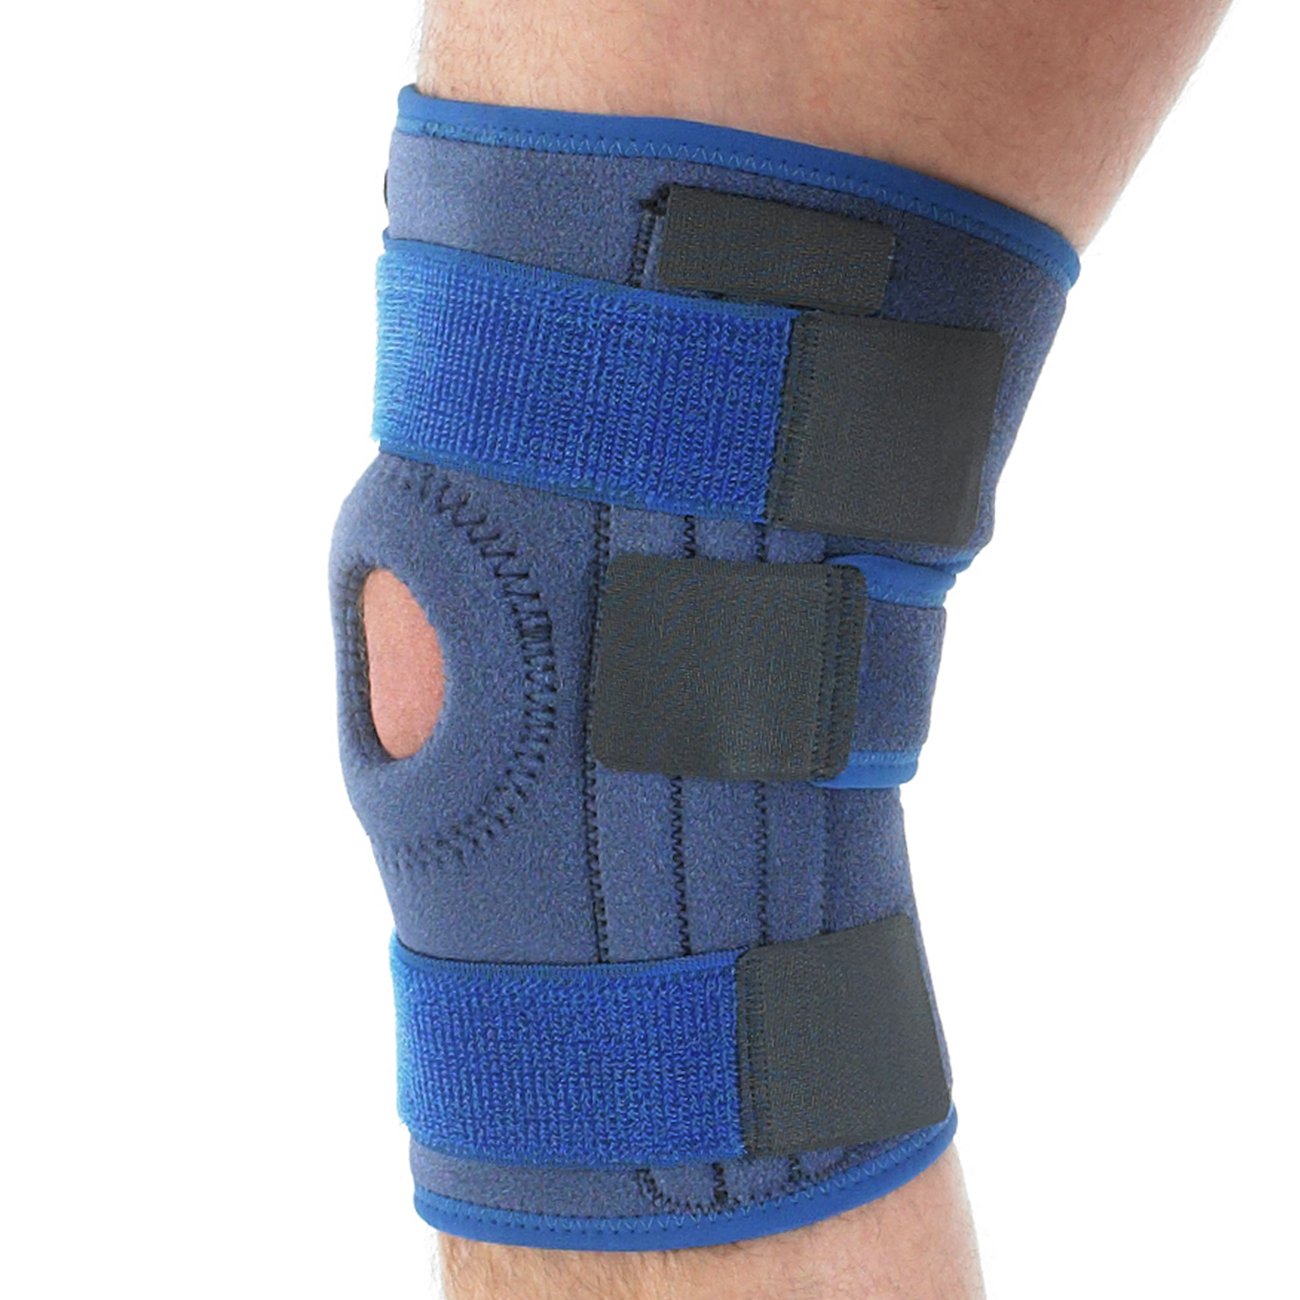 Neo G Stabilized Open Knee Support Reviews